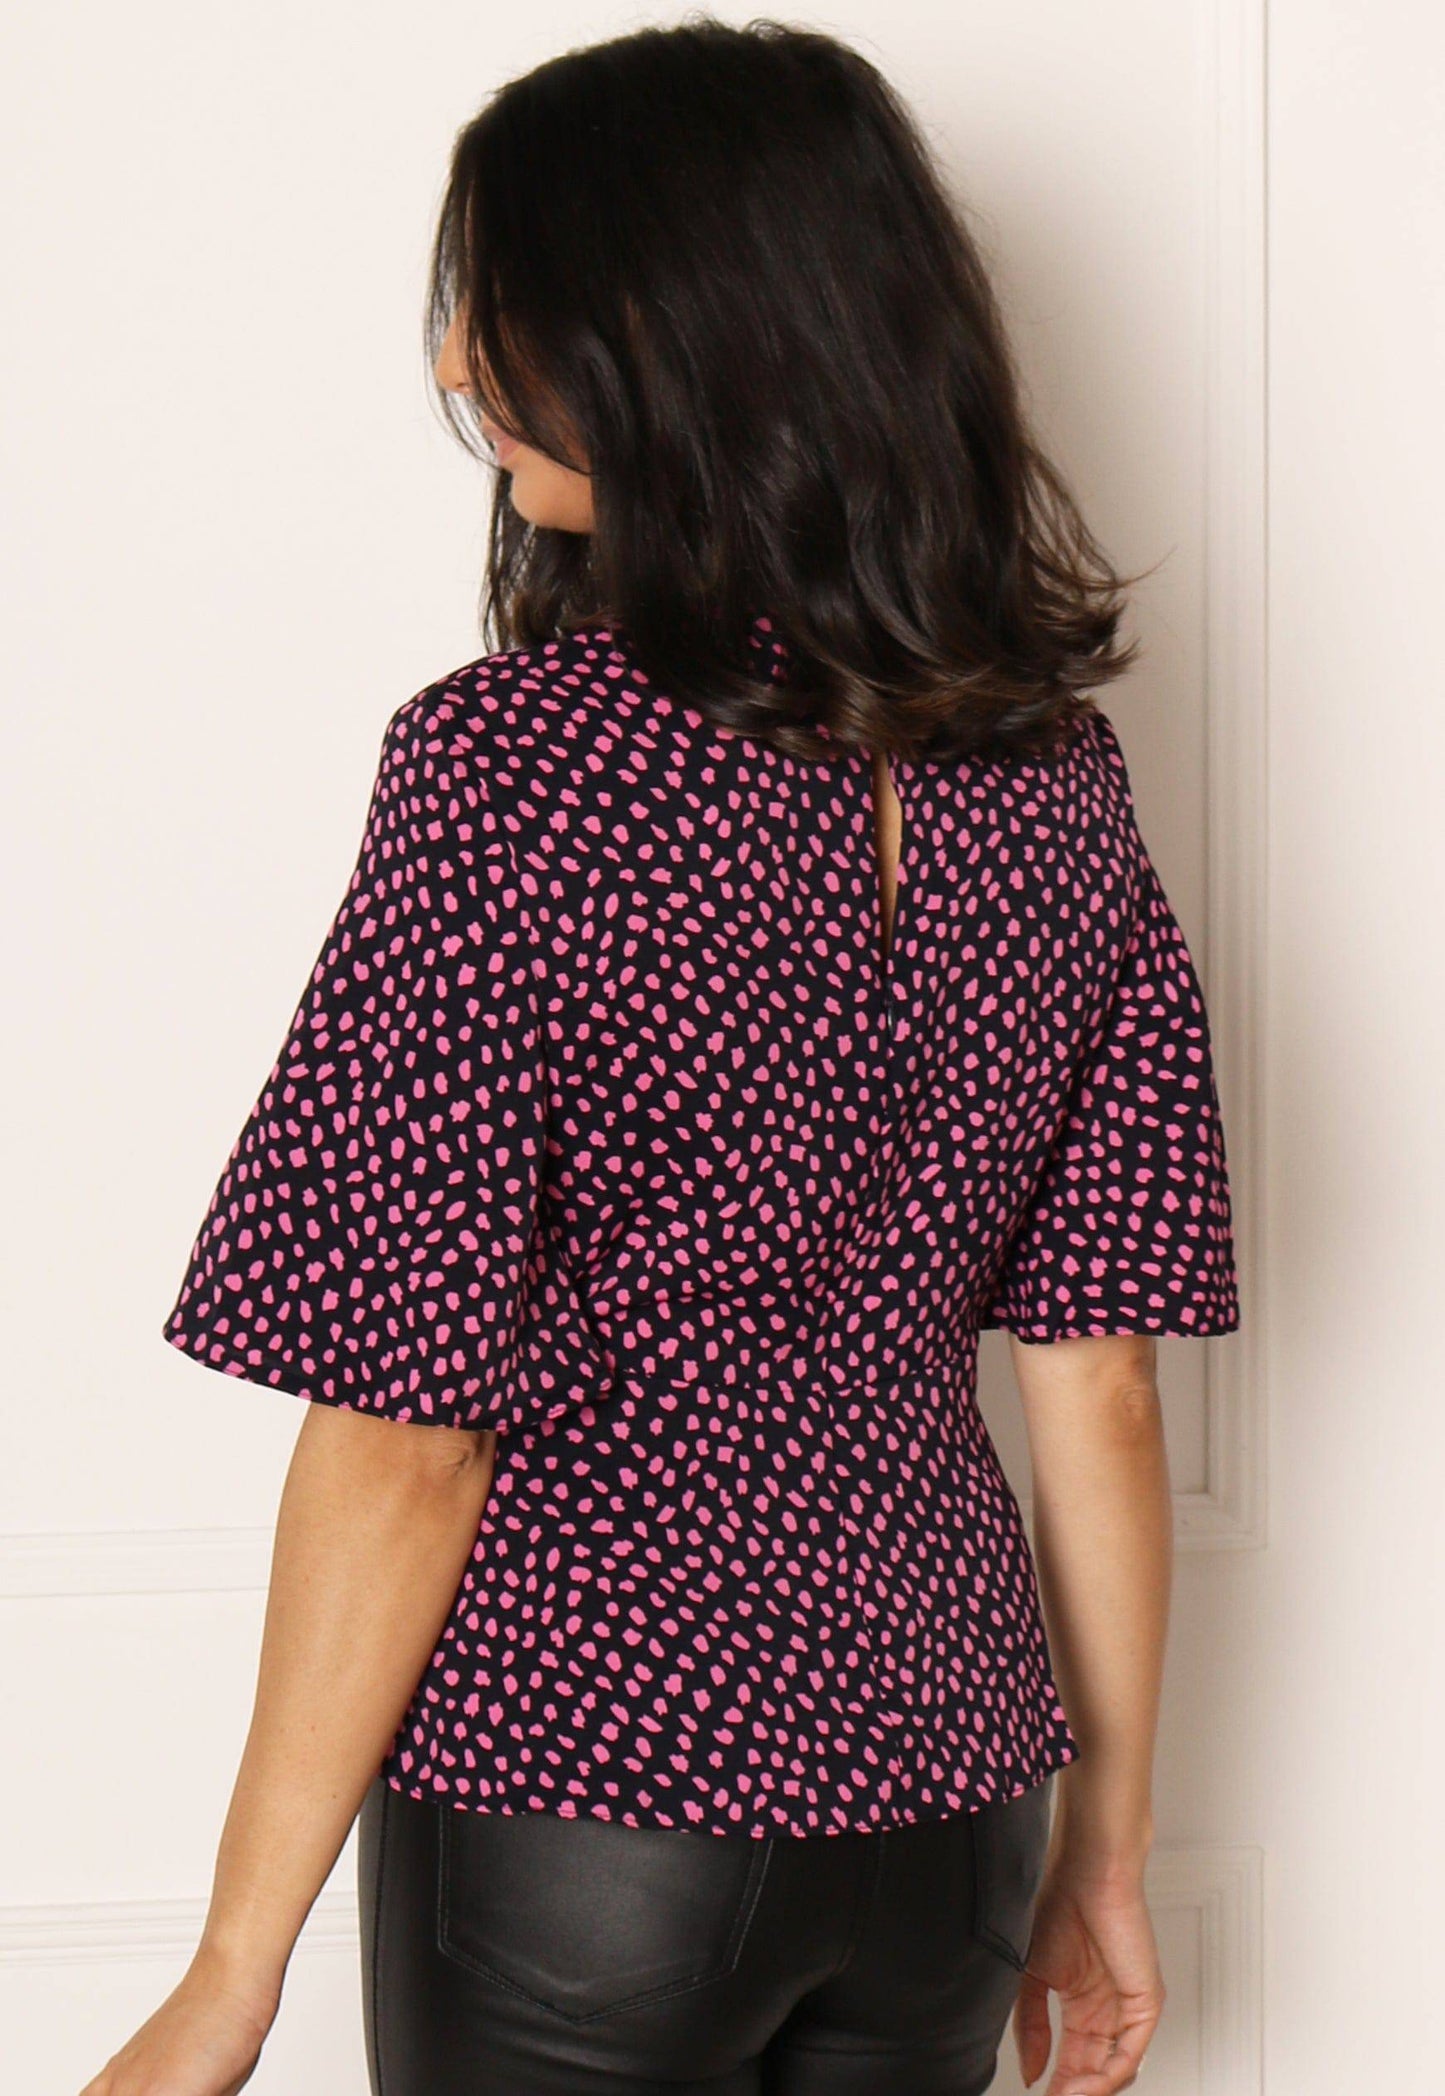 Kimono Sleeve Knot Detail Blouse Top in Black & Pink - One Nation Clothing